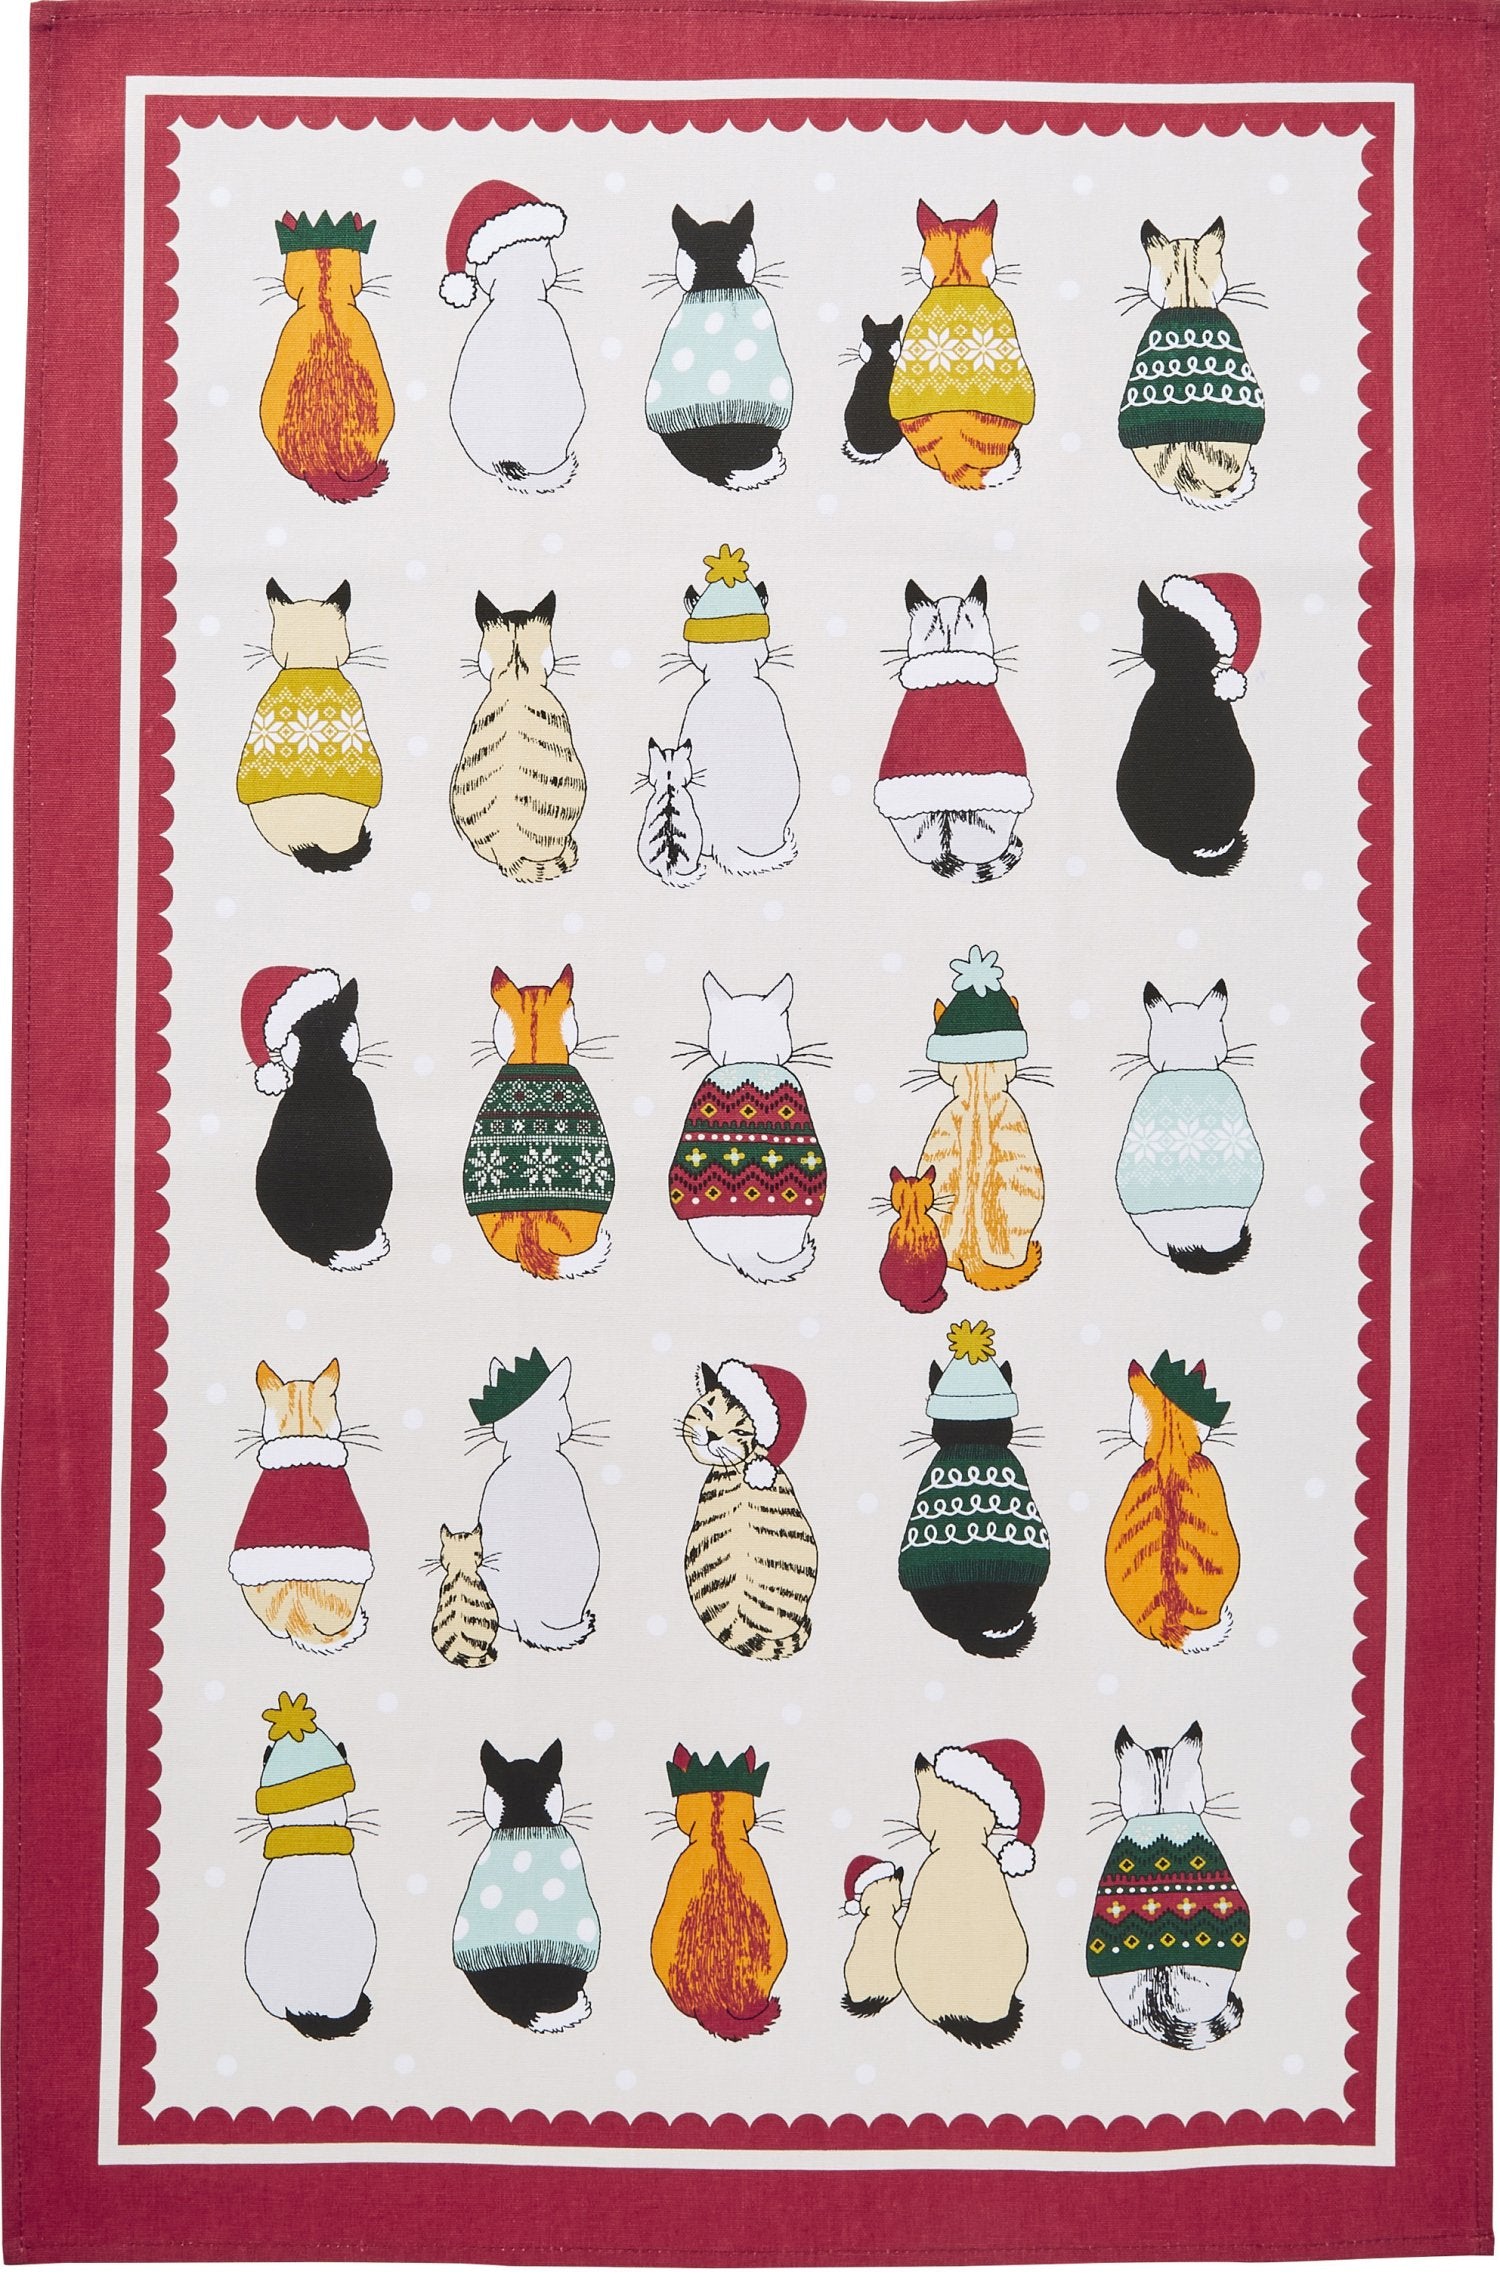 Ulster Weavers, "Christmas Cats in Waiting", Recycled cotton tea towel.